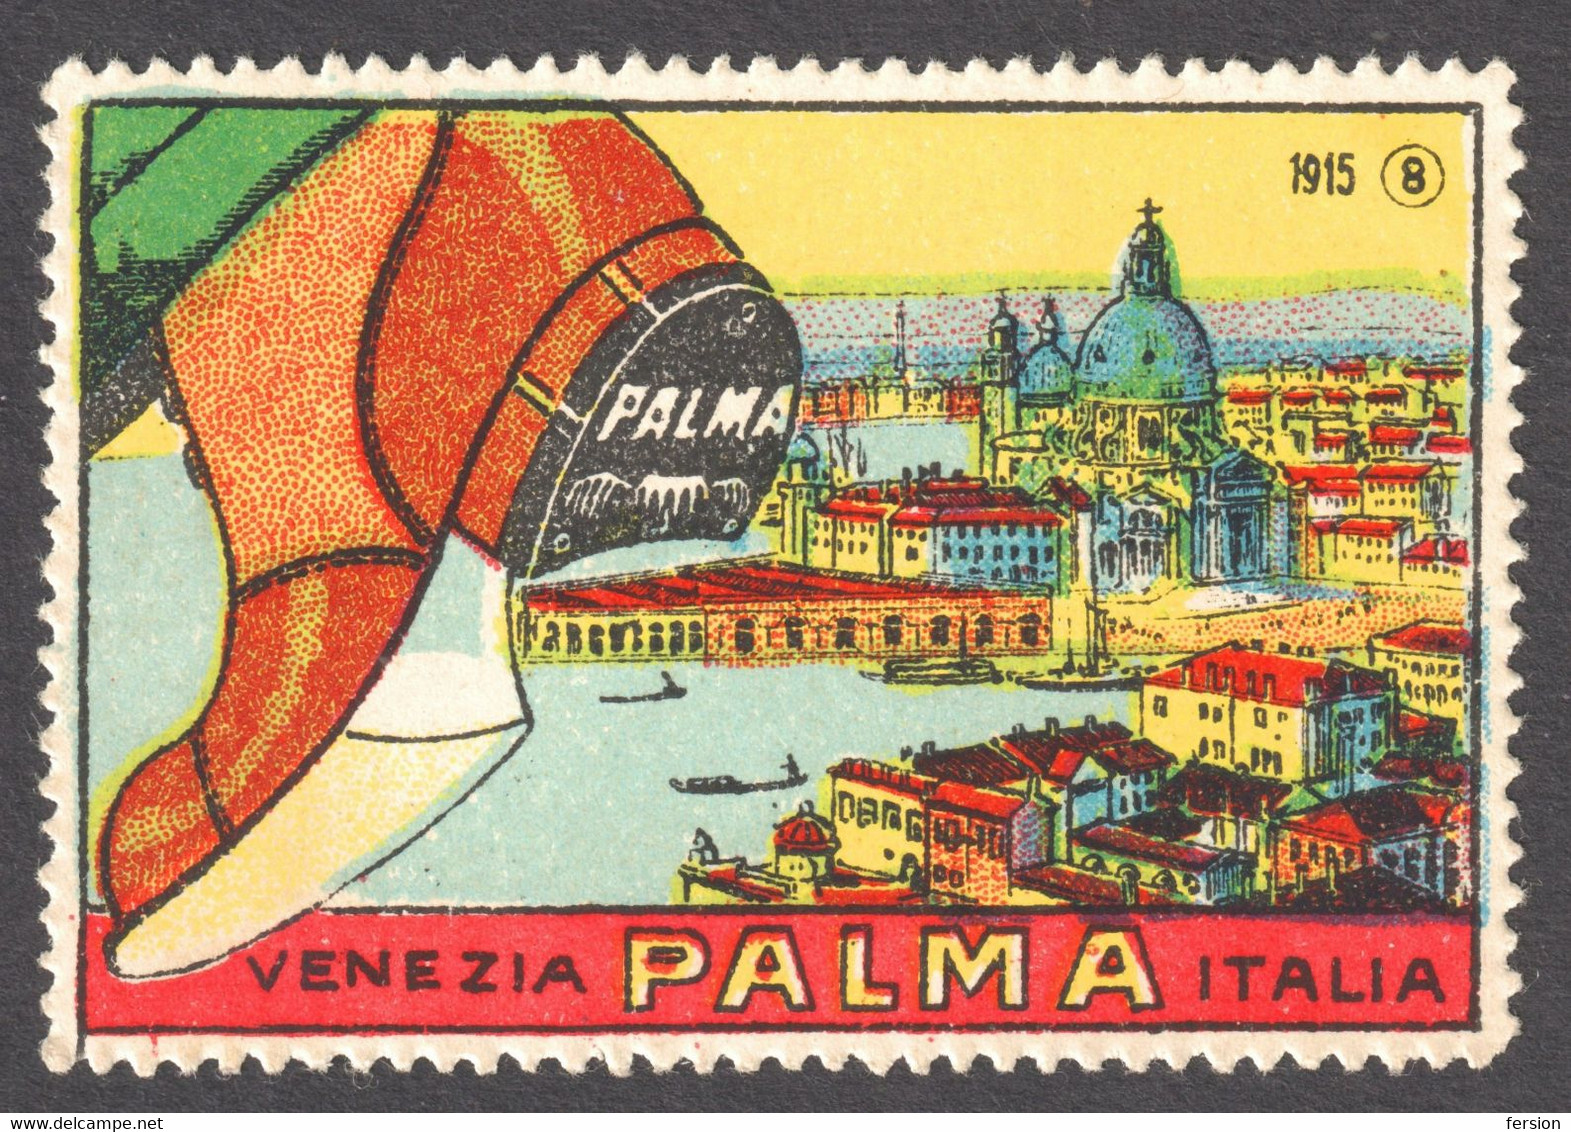 VENEZIA Cathedral St Mark's Basilica Italy PALMA Shoe 1915 - Advertising  Cinderella Label Vignette - Stamps For Advertising Covers (BLP)